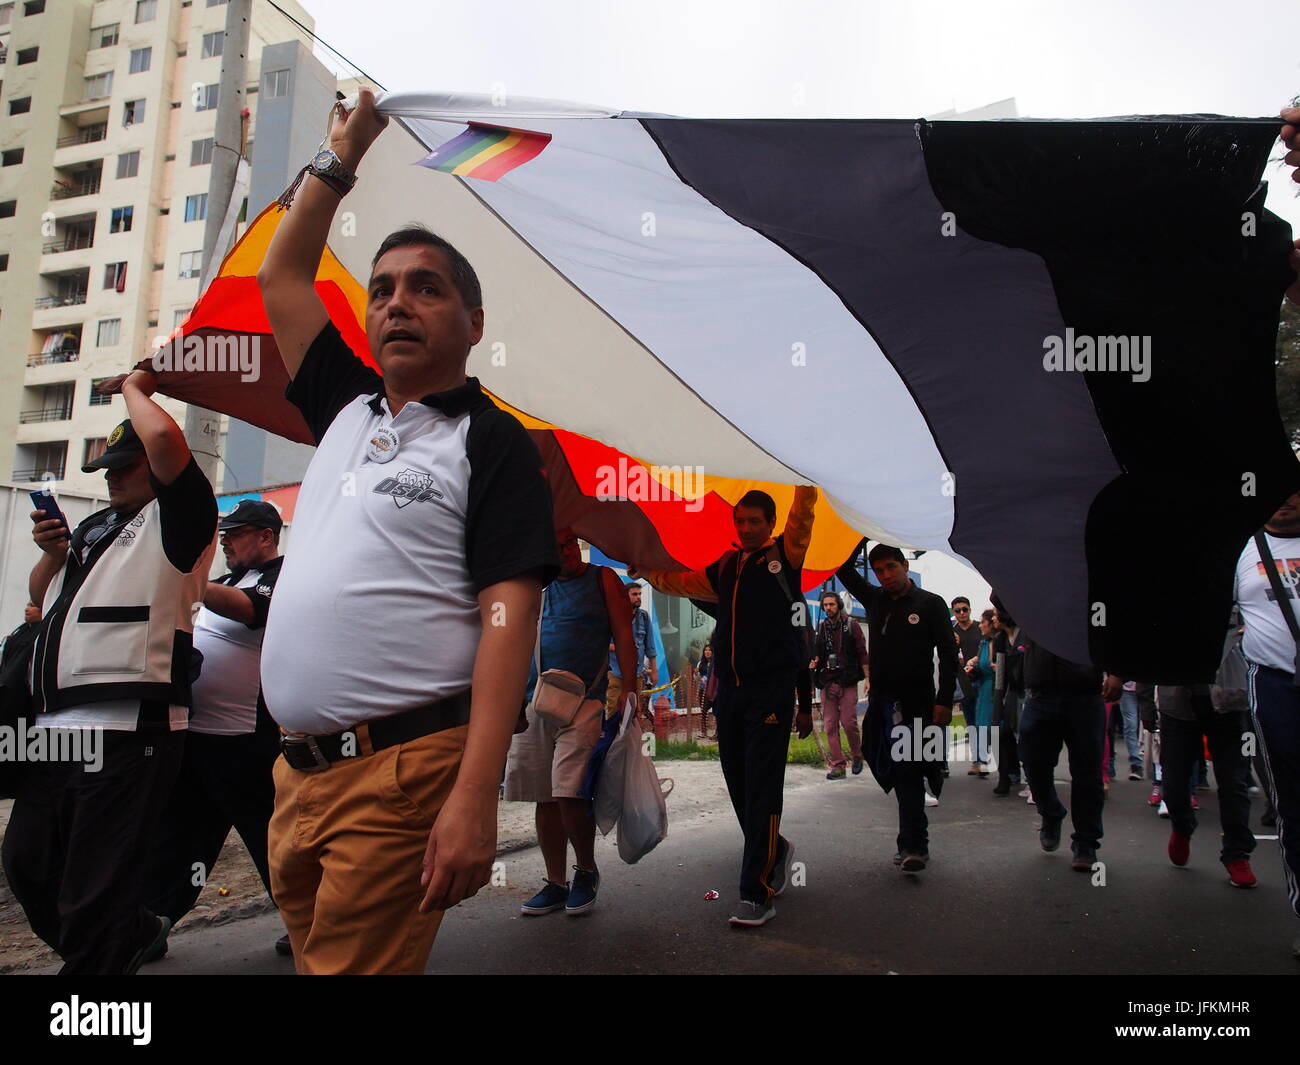 Lima, Peru. 01st July, 2017. International Bear Brotherhood Flag. Thousands of activists from the LGBT community and sympathizers participated in the pride parade Lima 2017 in search of recognition of their civil rights and against discrimination. Credit: Fotoholica Press Agency/Alamy Live News Stock Photo